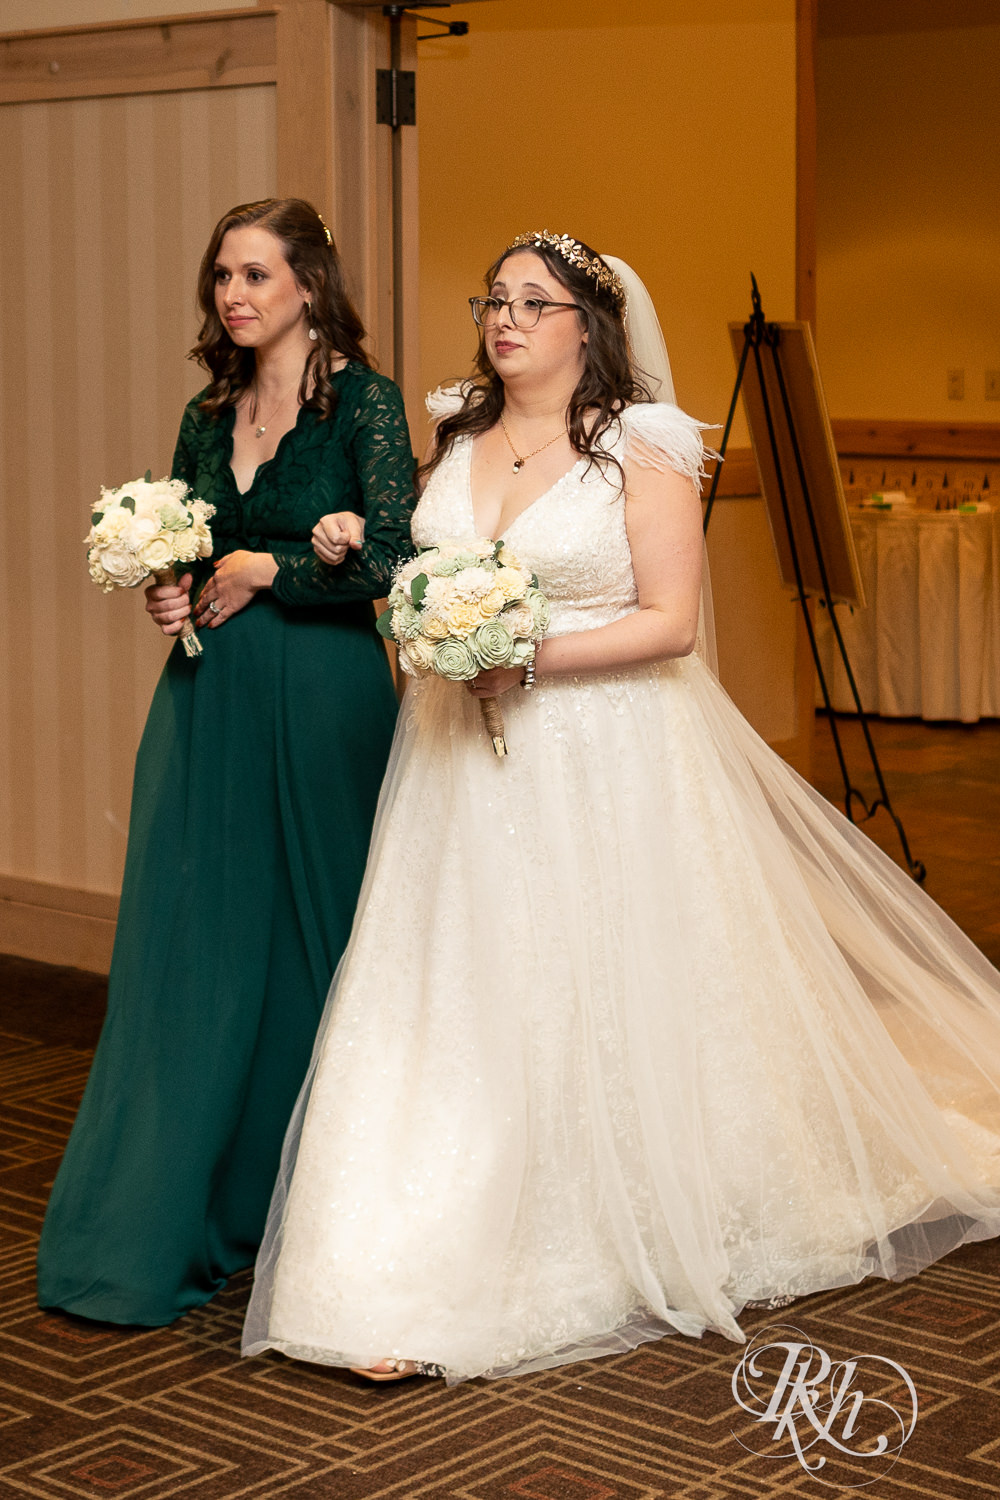 Bride walks down the aisle with her sister at Bunker Hills Event Center in Coon Rapids, Minnesota.